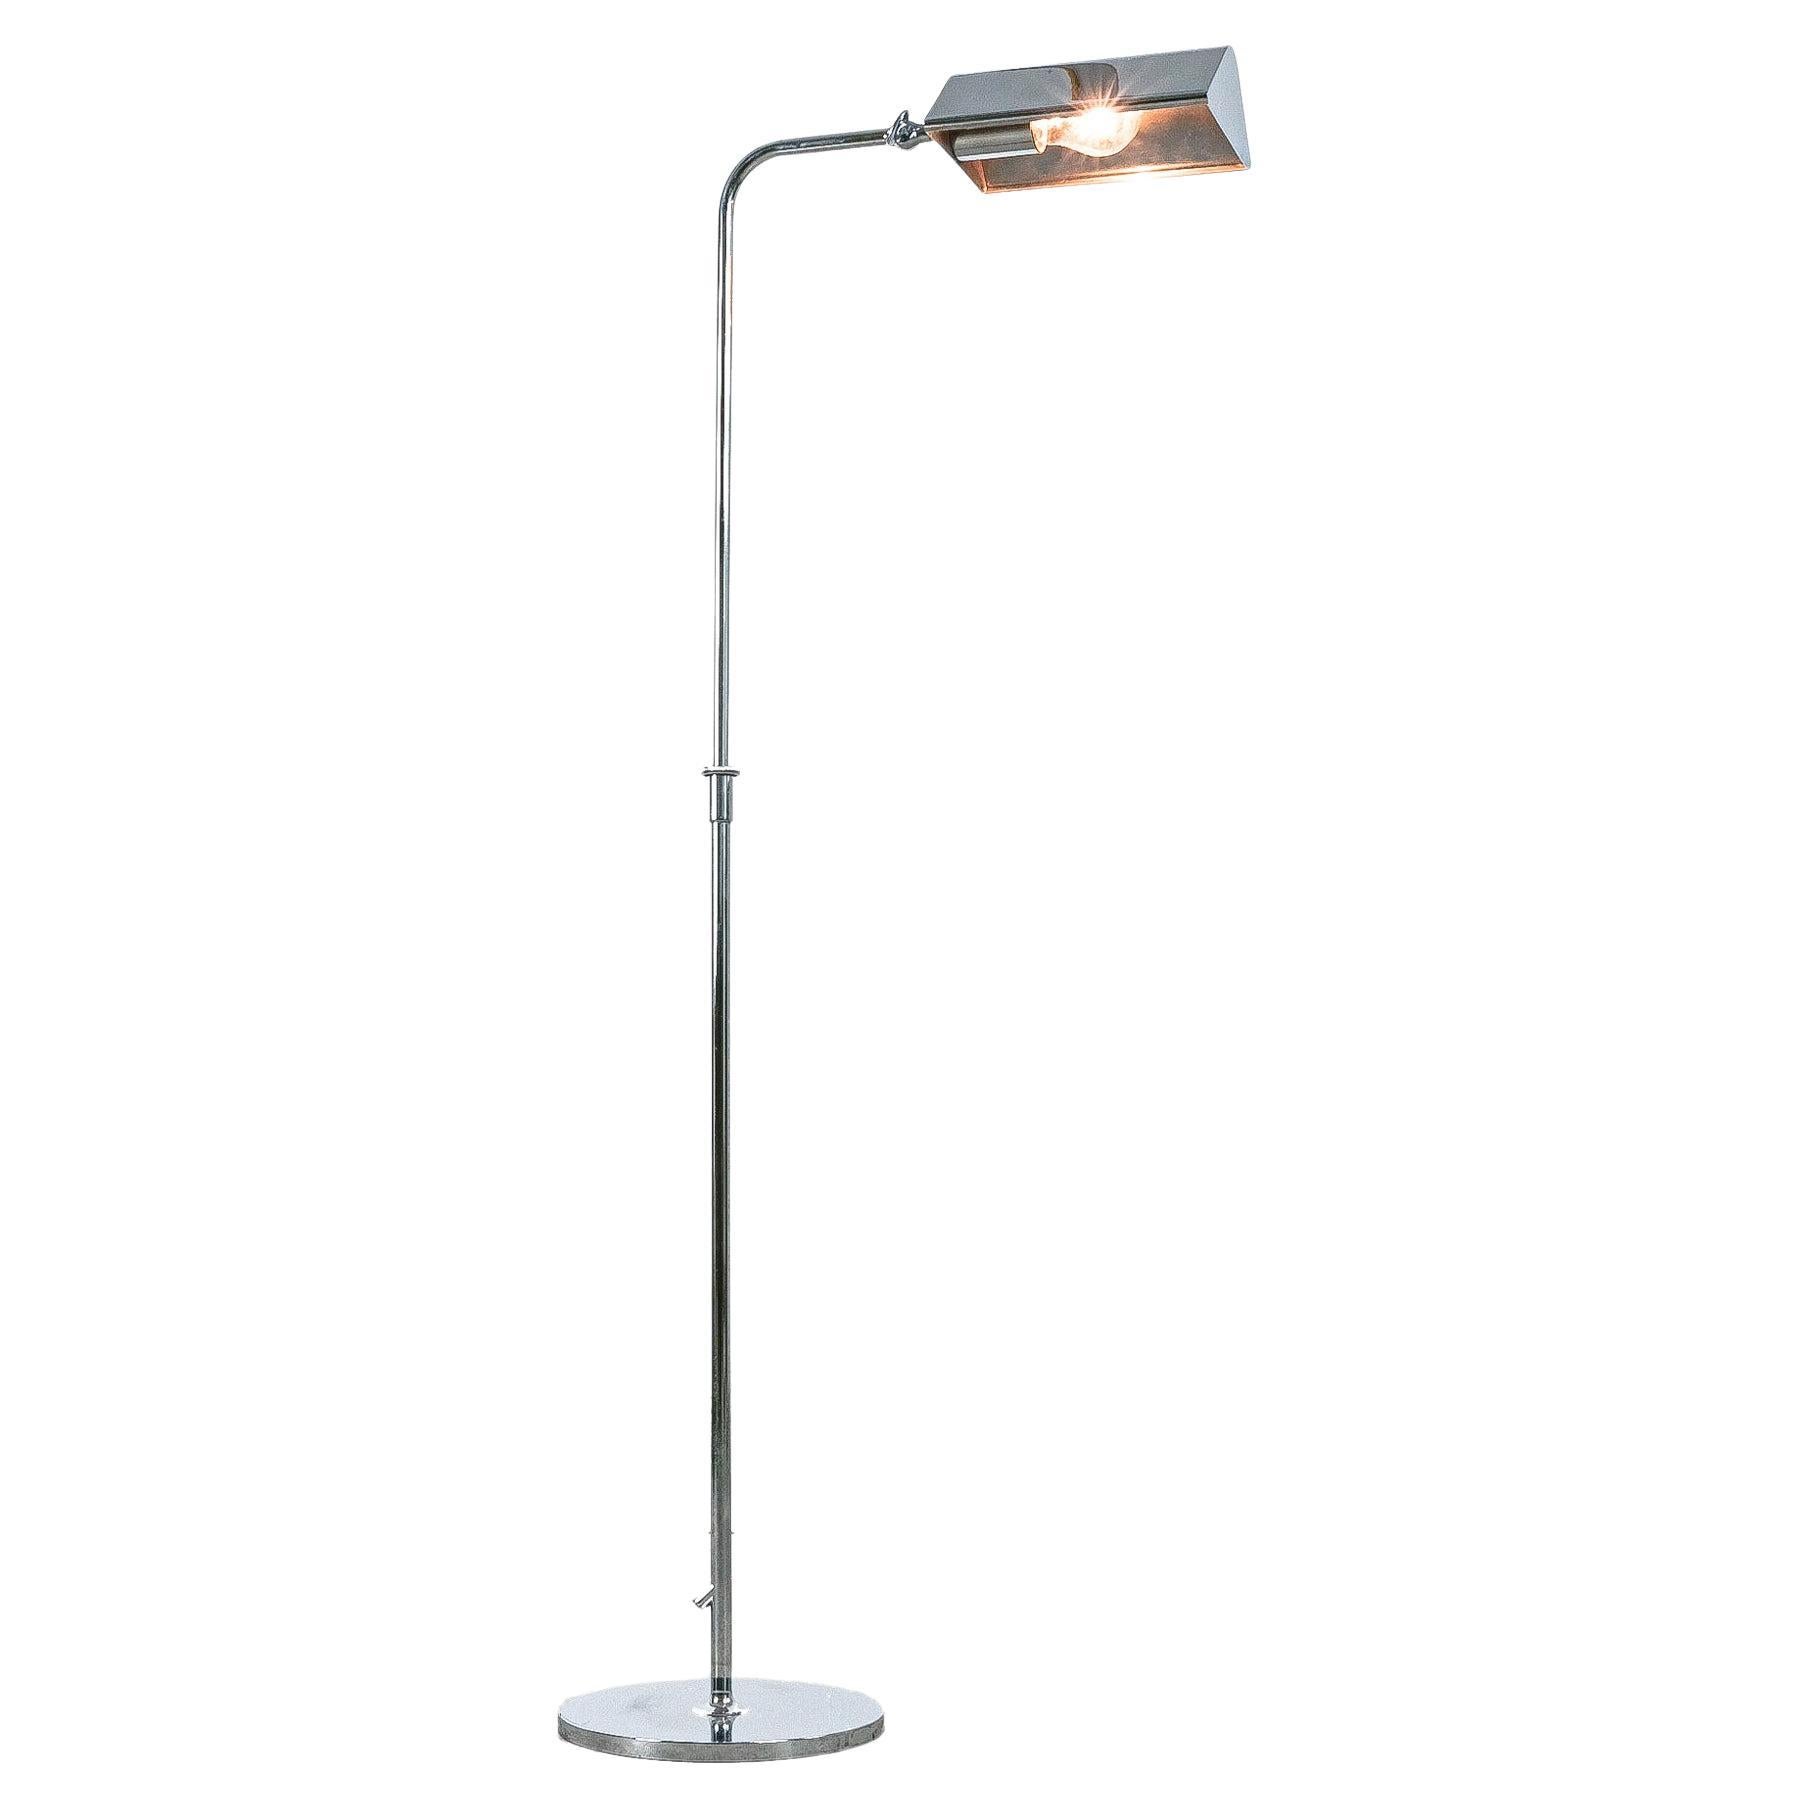 Florian Schulz Chrome Brass Floor Lamp with Adjustable Shade and Stem, 1970 For Sale